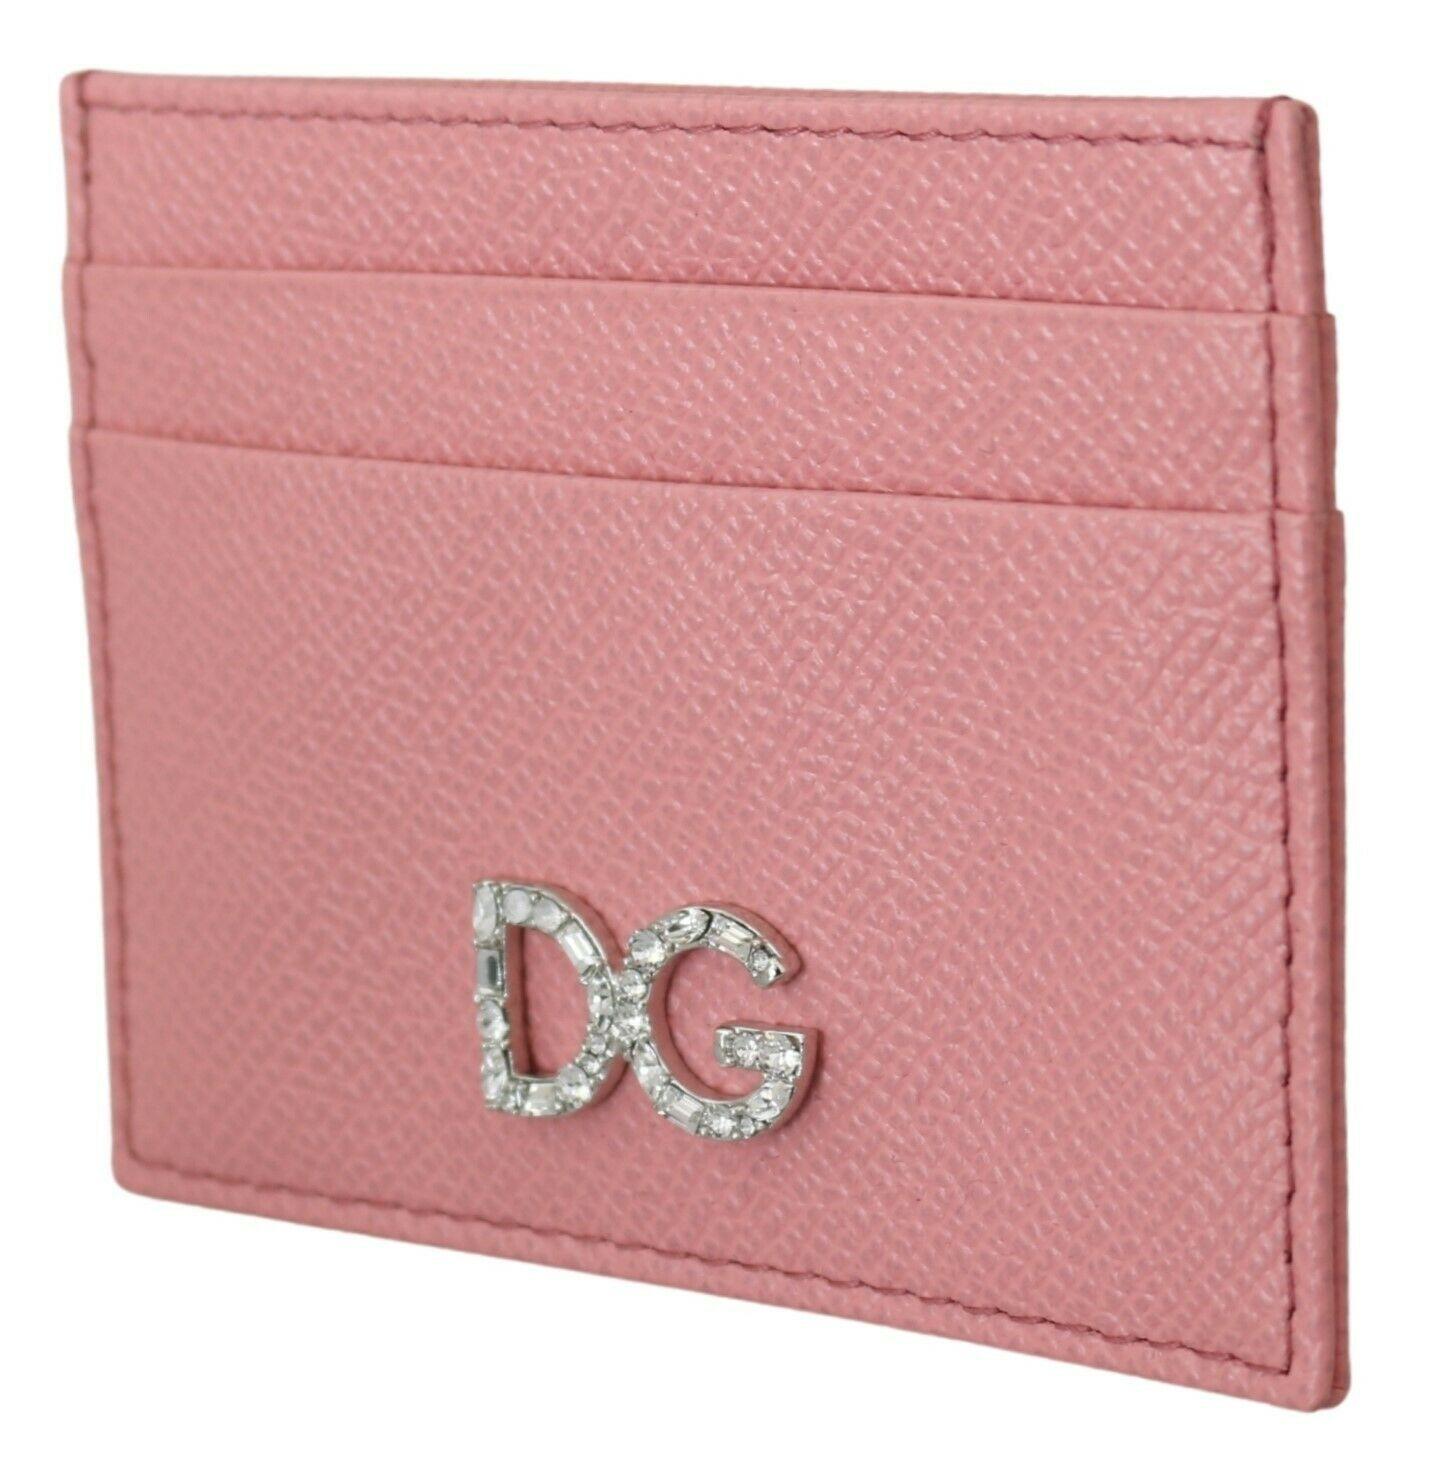 Gorgeous brand new with tags, 100% Authentic Dolce & Gabbana wallet.



Model: Cardholder wallet
Material: 100% Leather
Color: Pink with clear crystals
Cardholder slots
Logo engraved metal hardware
Made in Italy

Measurements: 10cm x 7cm x